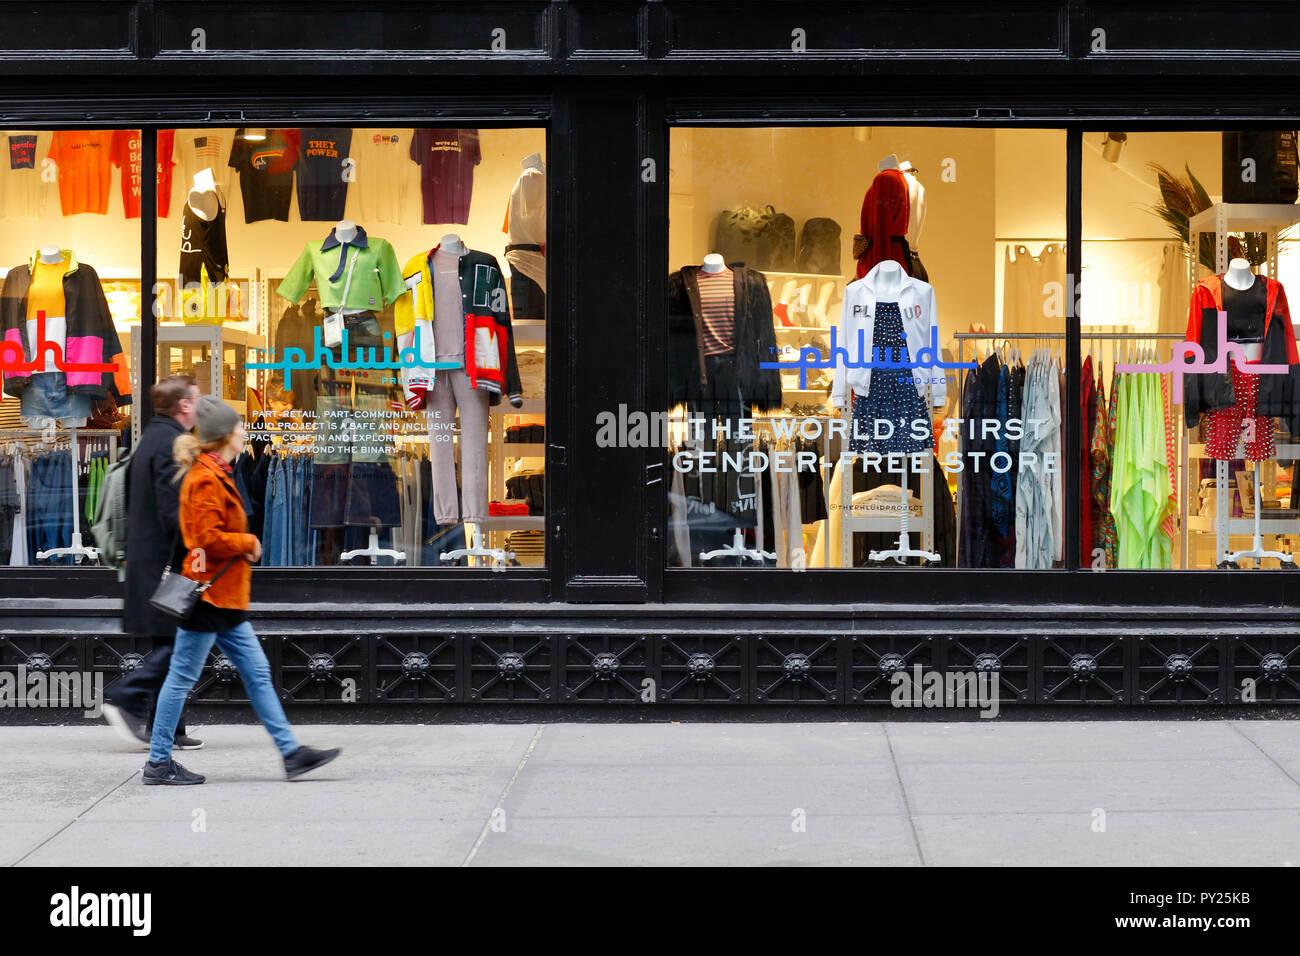 The Phluid Project, 684 Broadway, New York, NY. exterior of a gender neutral clothing store in the NoHo neighborhood of Manhattan. Stock Photo